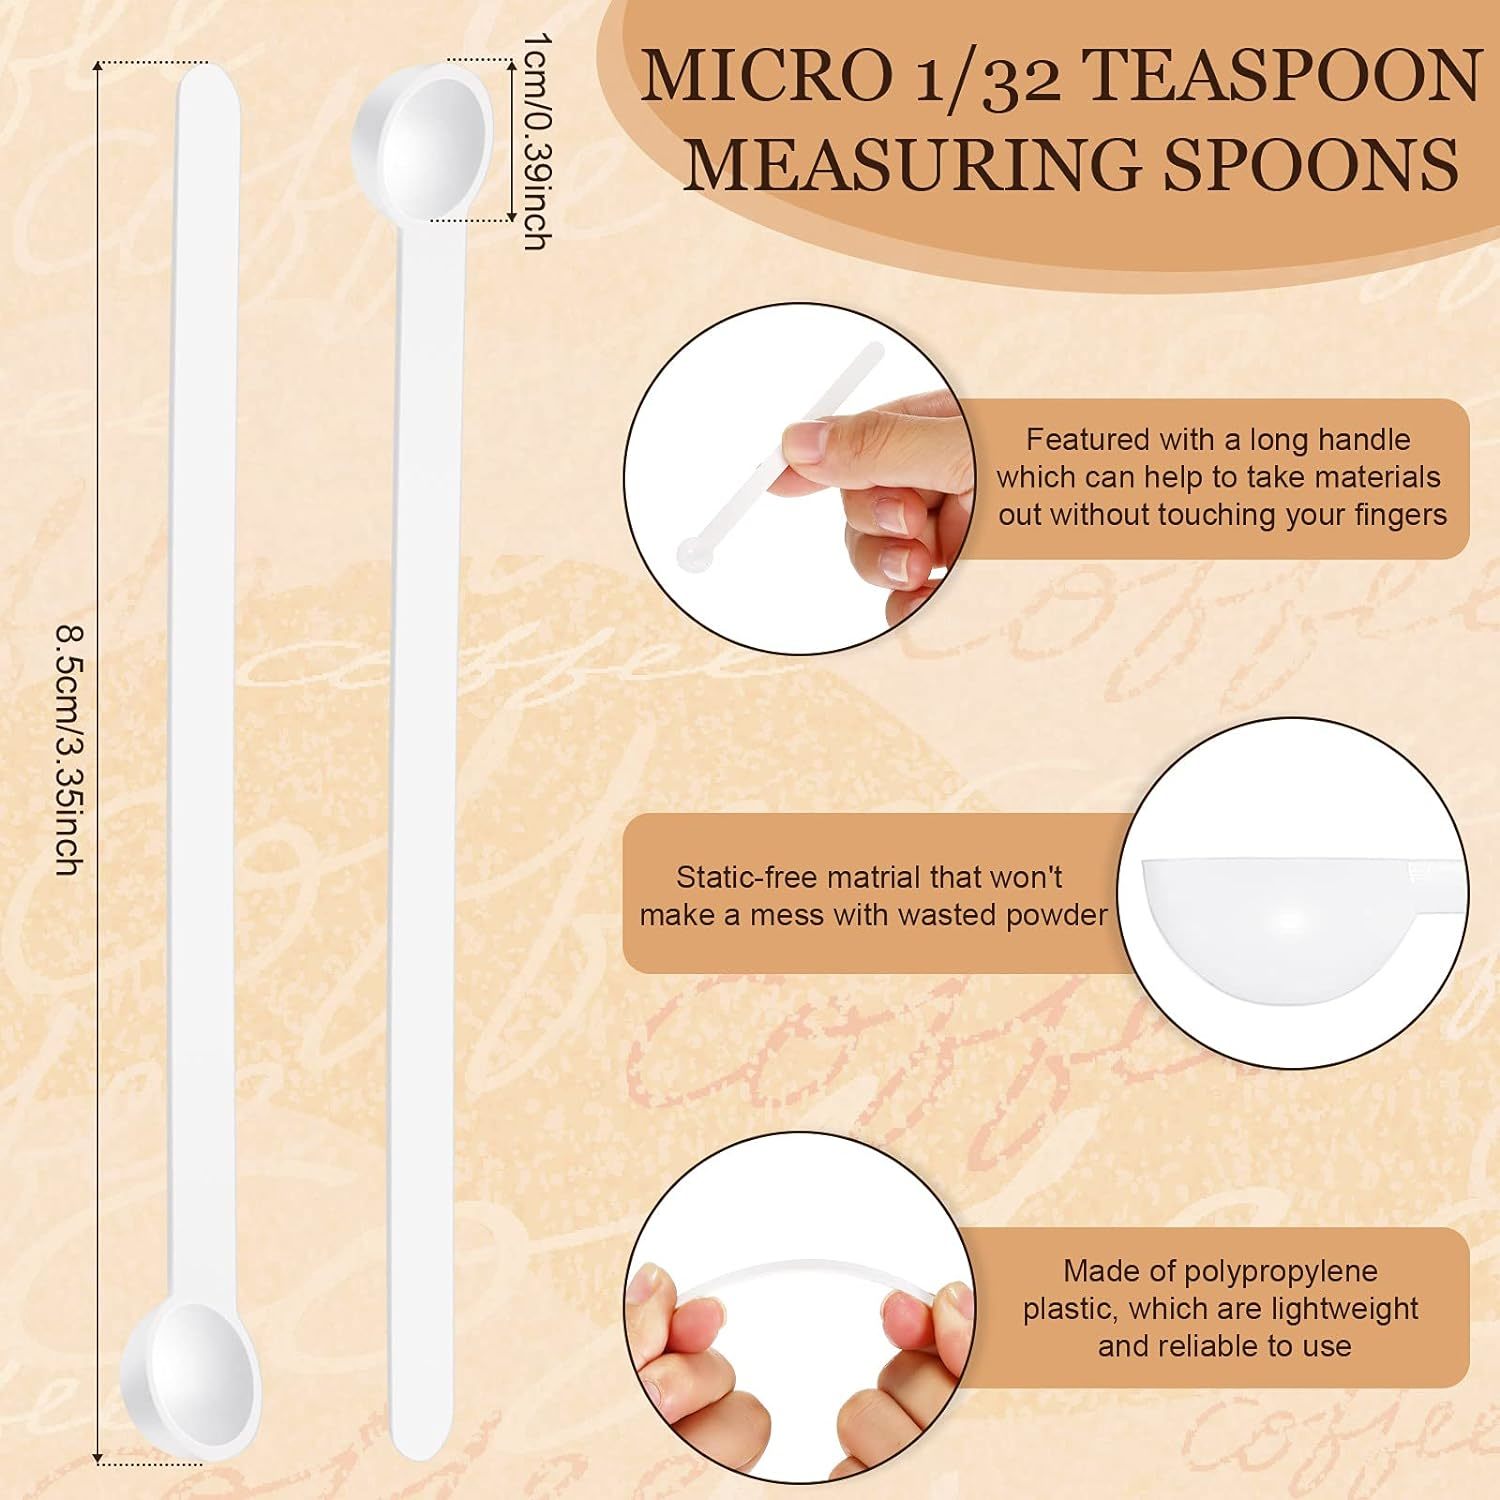  1/32 Teaspoon Micro Scoops 150 Milligram Mini Measuring Spoons  Tiny Little Plastic Scoop for Measuring Cosmetics, Medicines, Powders,  Glitter and Seasoning (White,16 Pieces): Home & Kitchen